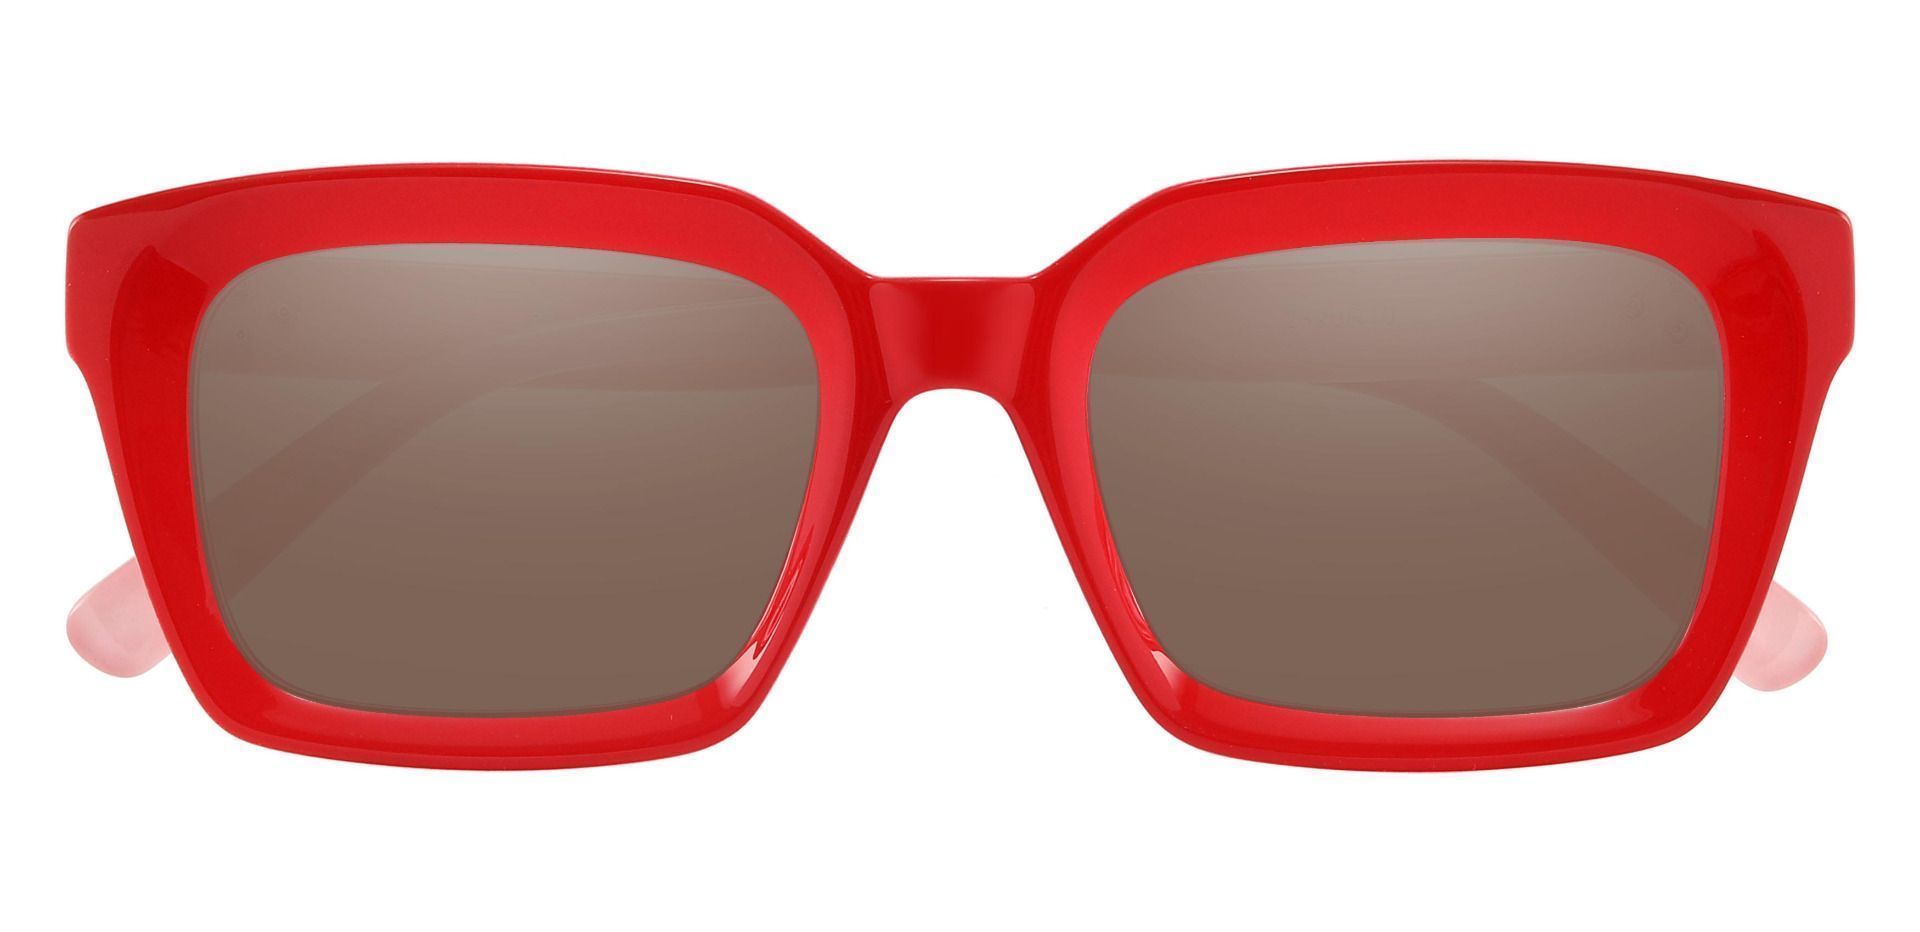 Unity Rectangle Progressive Sunglasses - Red Frame With Brown Lenses